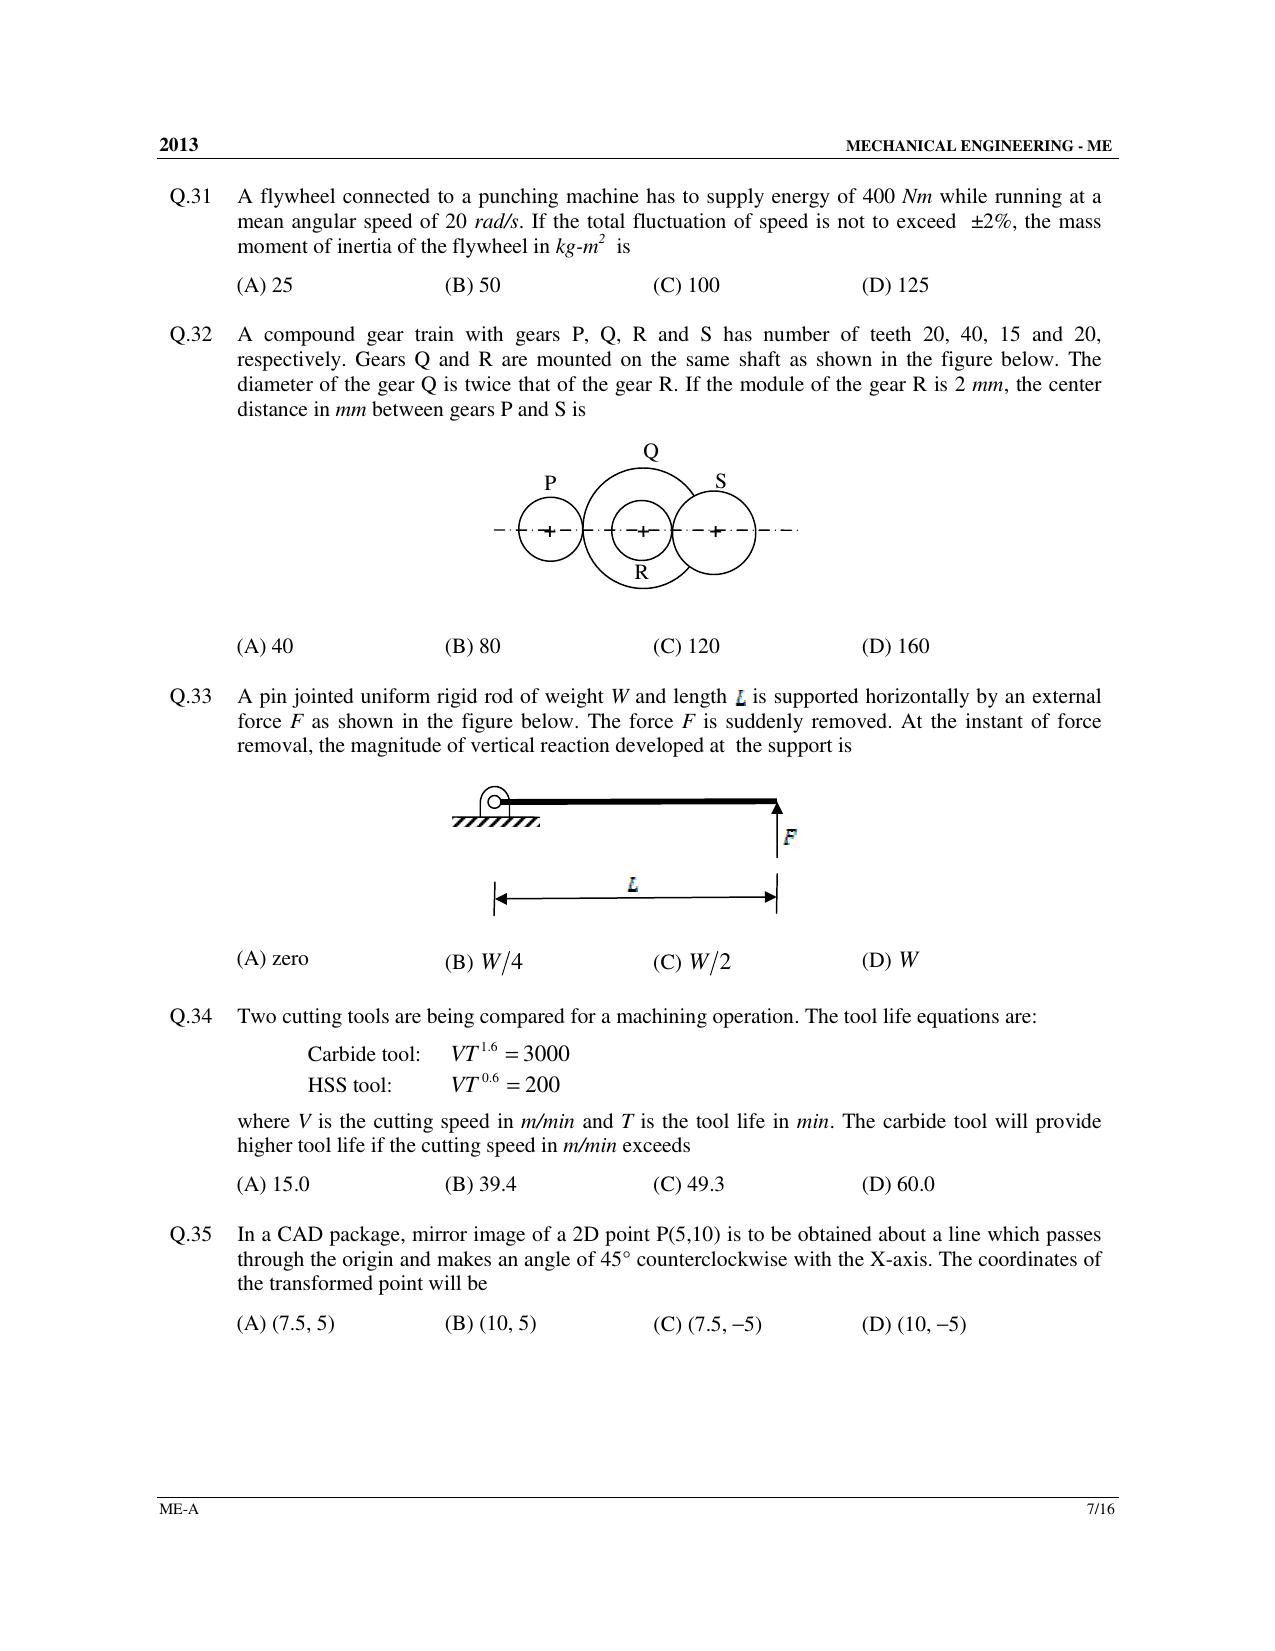 GATE 2013 Mechanical Engineering (ME) Question Paper with Answer Key - Page 8